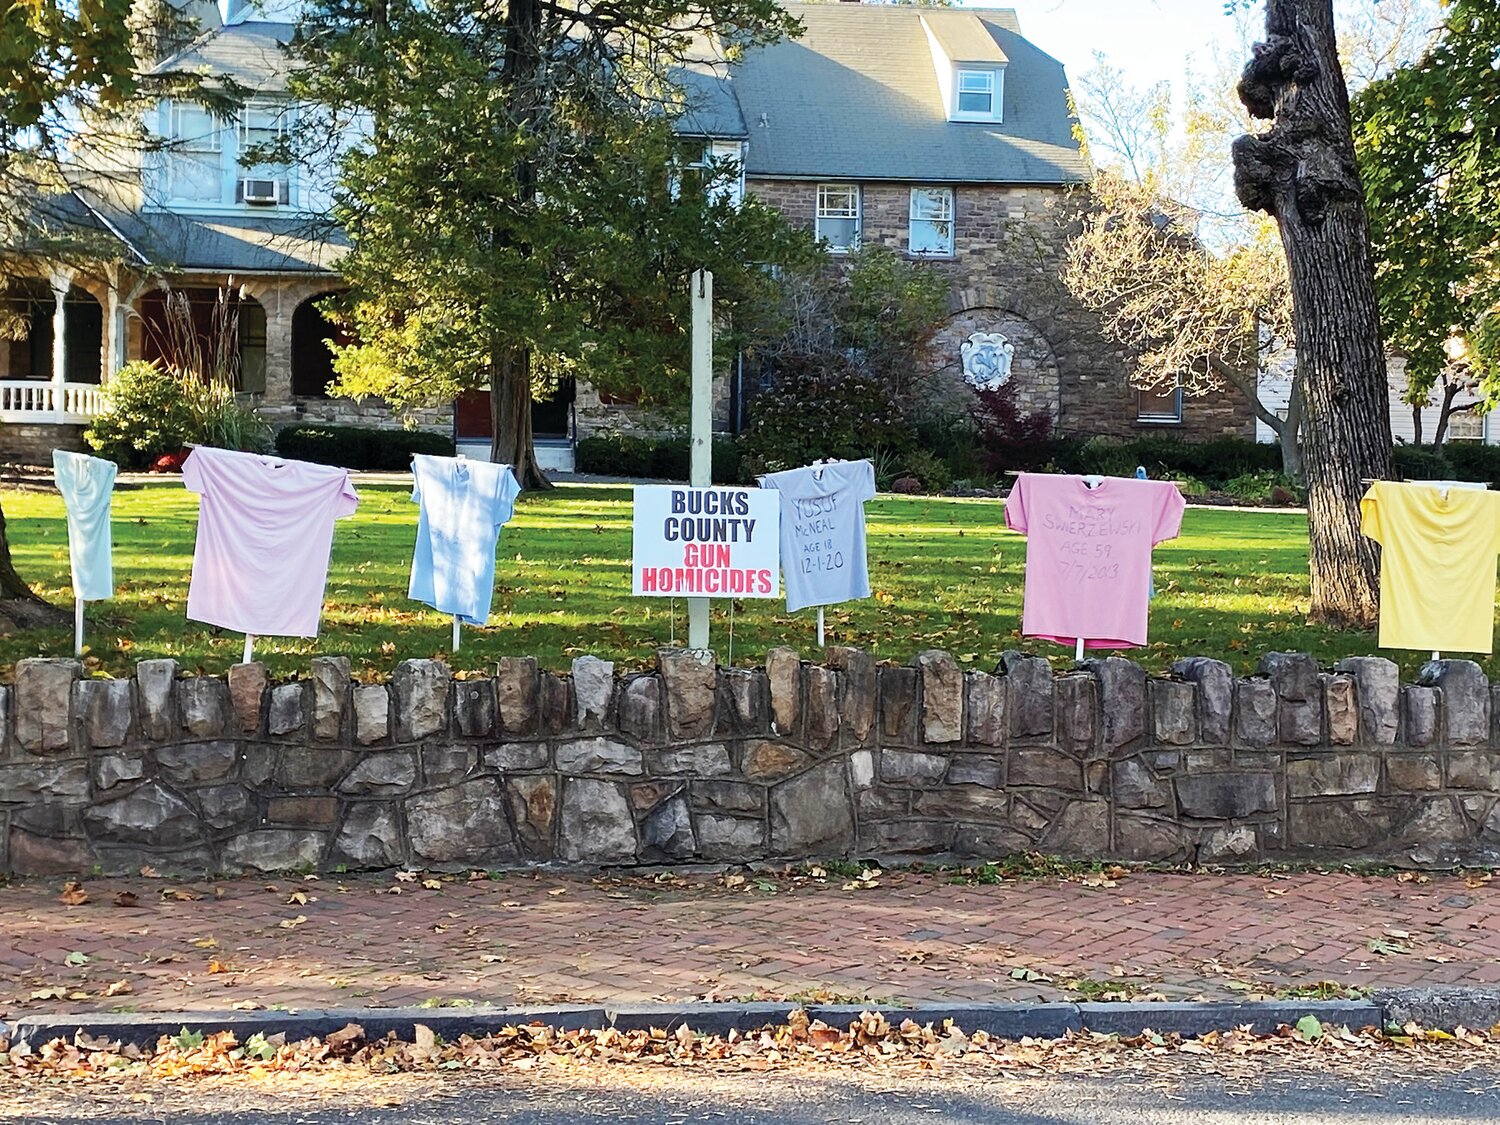 Heeding God’s Call to End Gun Violence, a grassroots, interfaith organization, has placed shirts with the names of Bucks County residents killed by gun violence in the last 10 years along East Court Street in Doylestown Borough, across the street from Salem UCC. The nonprofit will be holding a Witness Walk on Nov. 19.